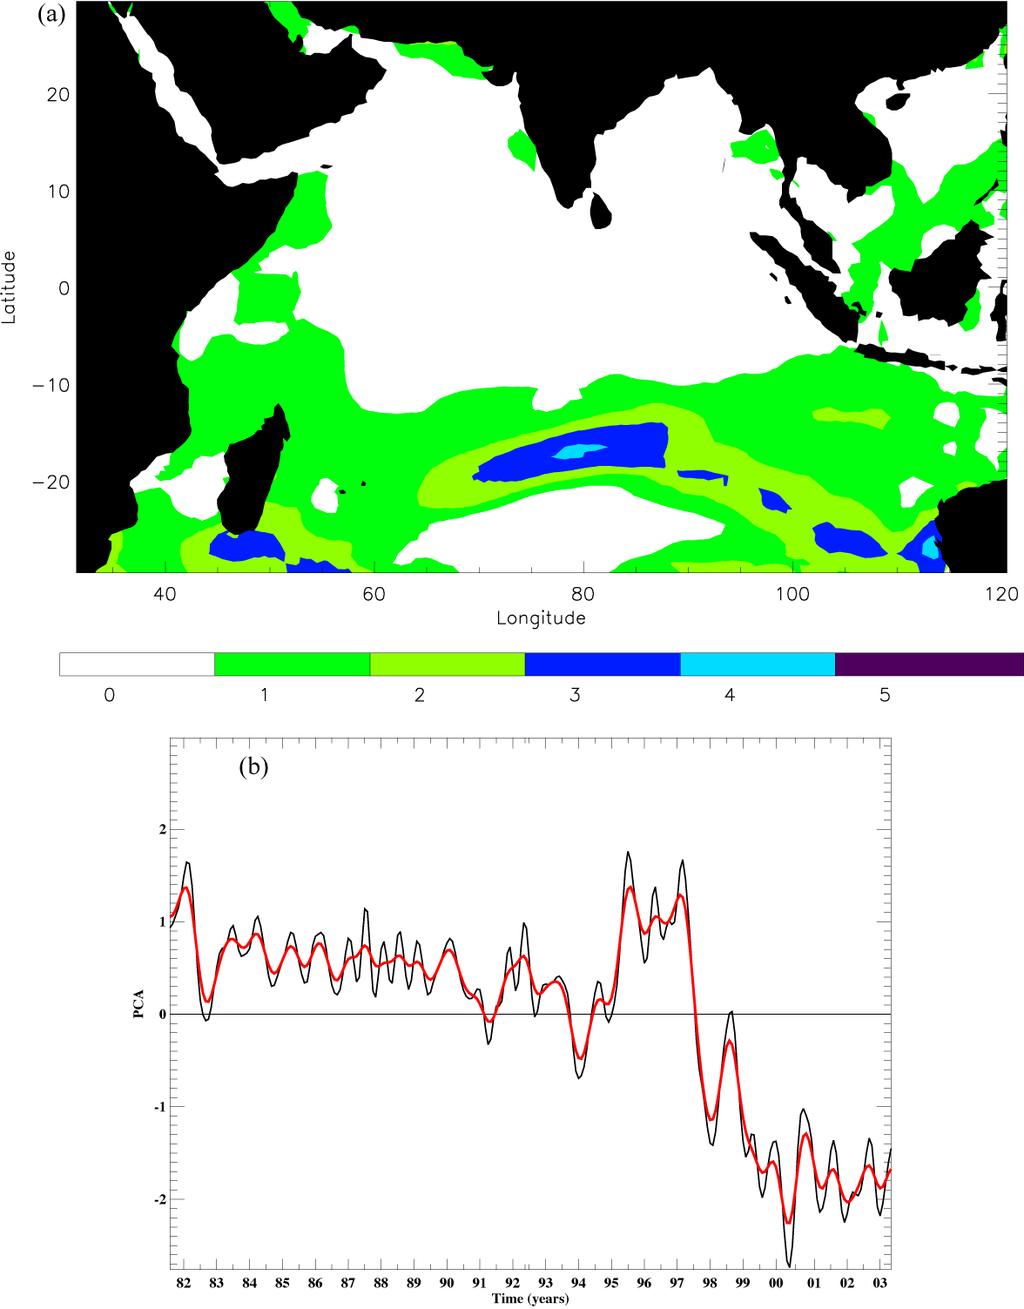 FIG. 9 First EOF (18.4% of the variance) of sensible heat flux for the Indian Ocean. The spatial pattern (a) and time series (b) are scaled by the mean JJAS principal component.